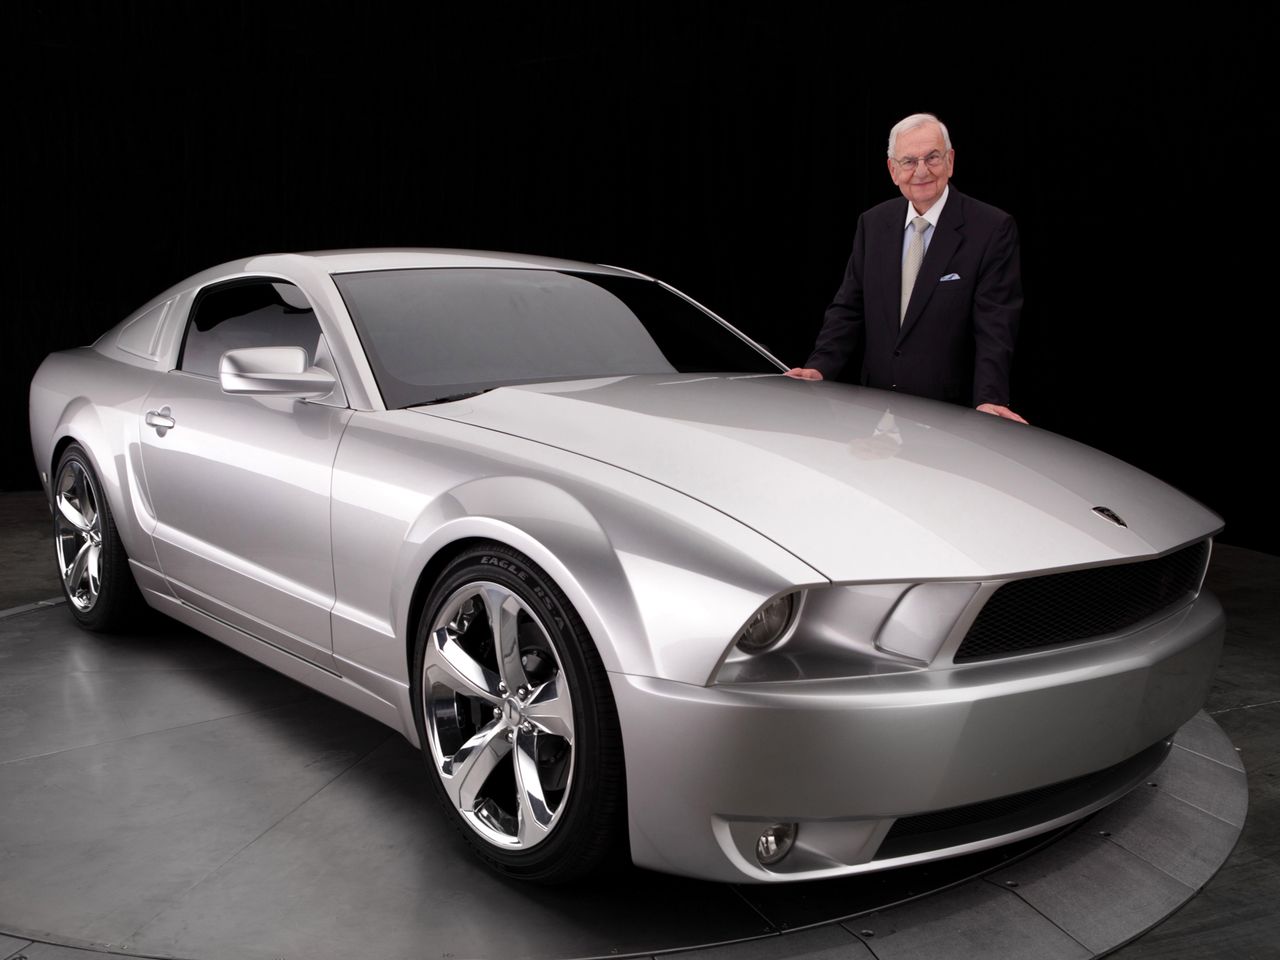 Ford Mustang Iacocca 45th Anniversary Edition